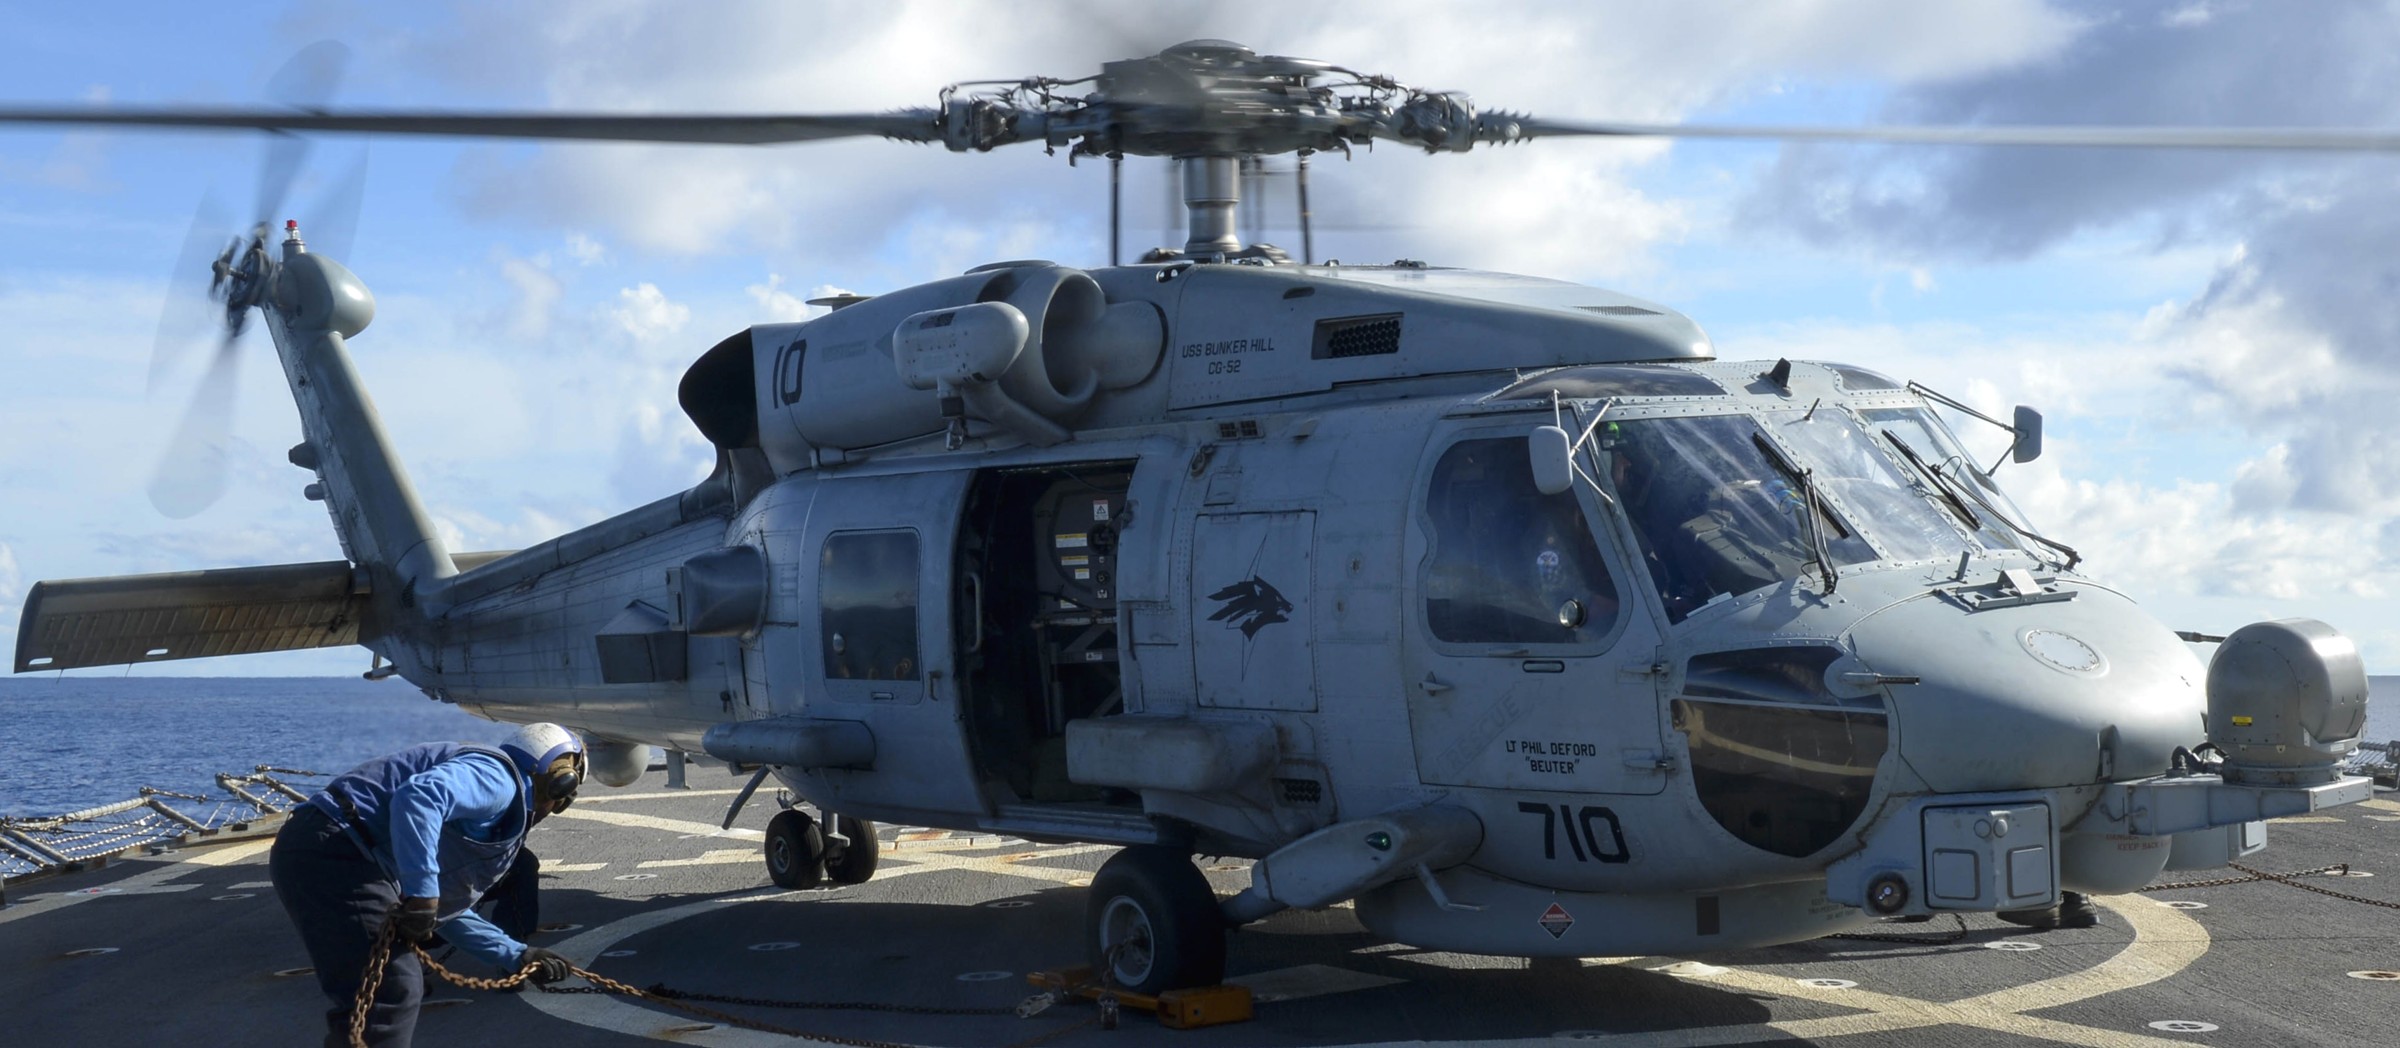 hsm-75 wolf pack helicopter maritime strike squadron mh-60r seahawk ddg-59 uss russell 93